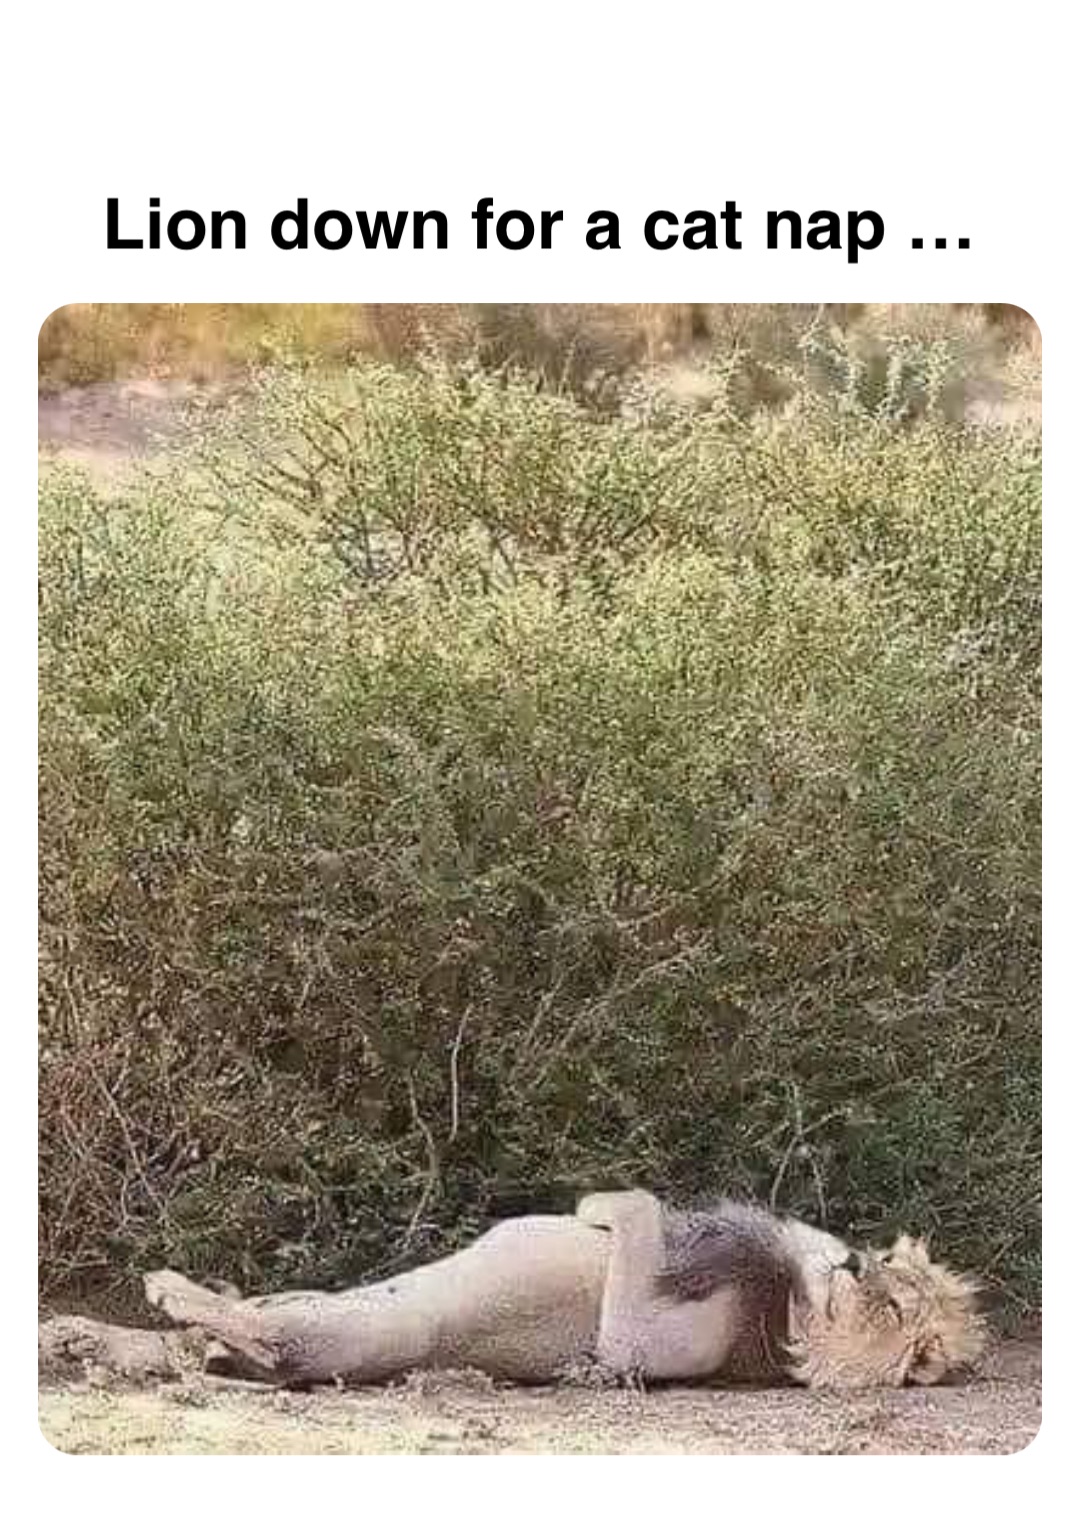 Double tap to edit Lion down for a cat nap …